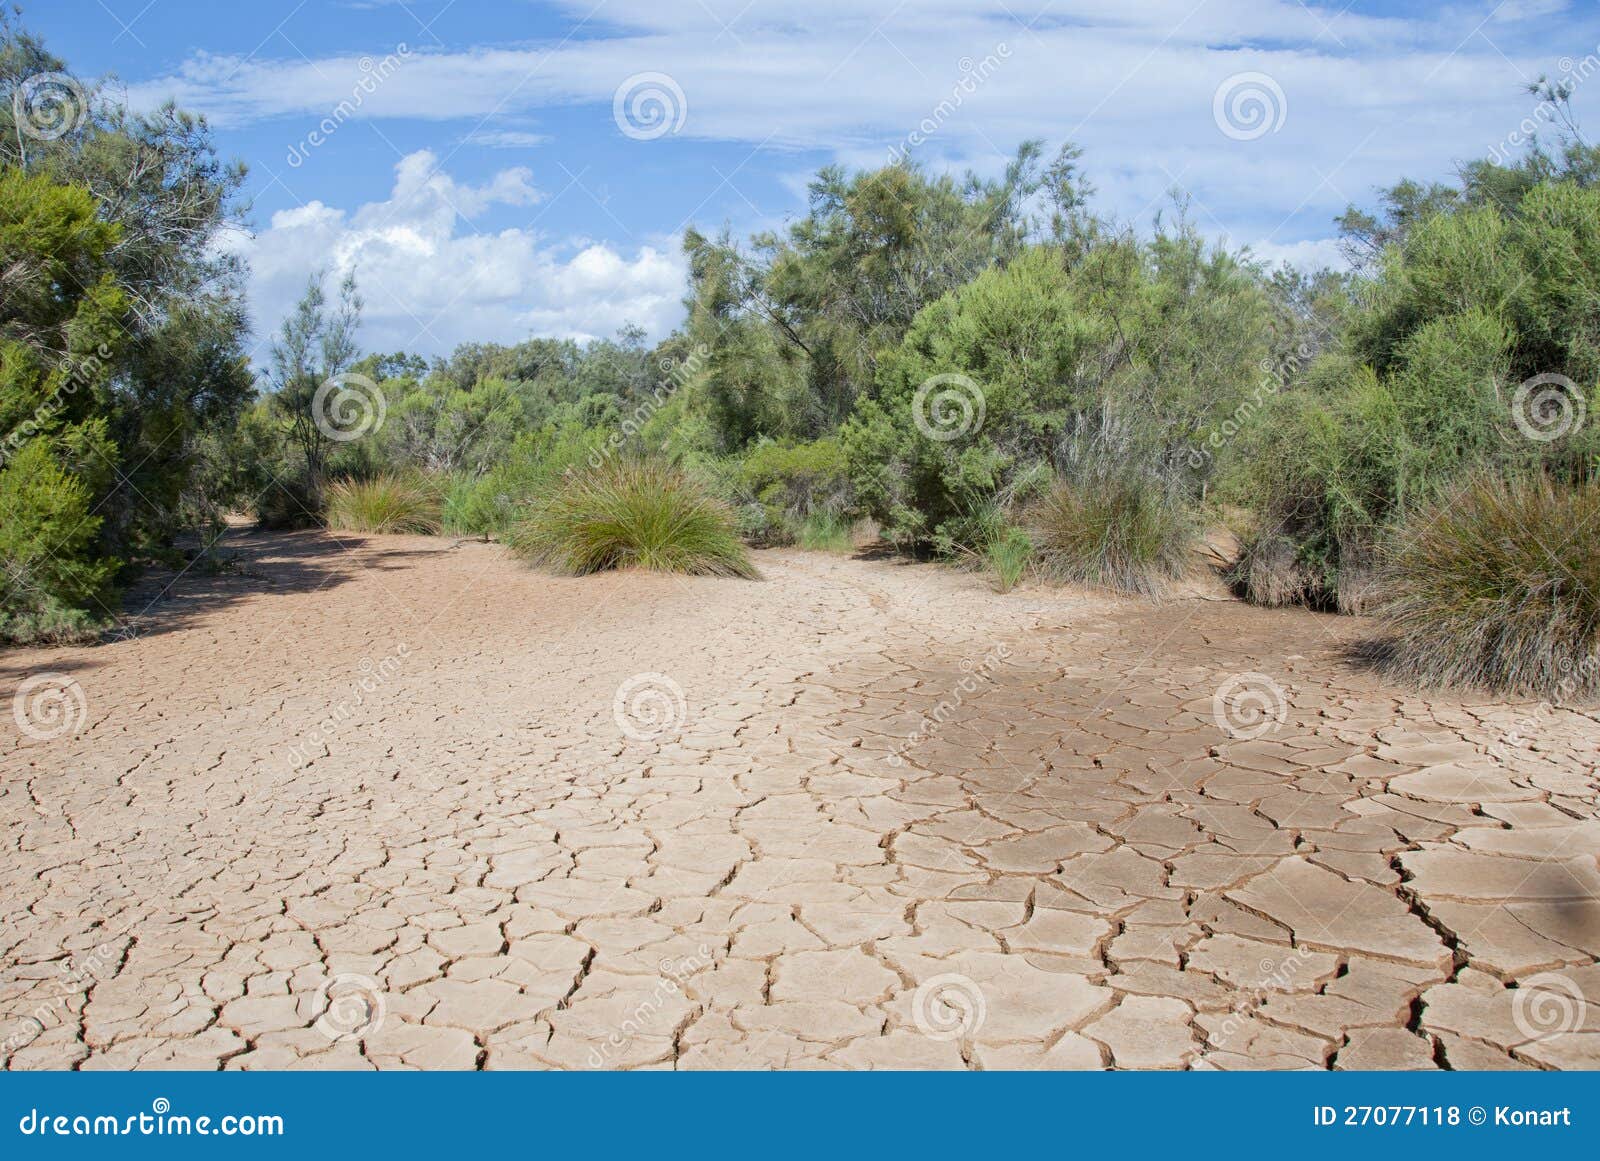 dry river bed with plants